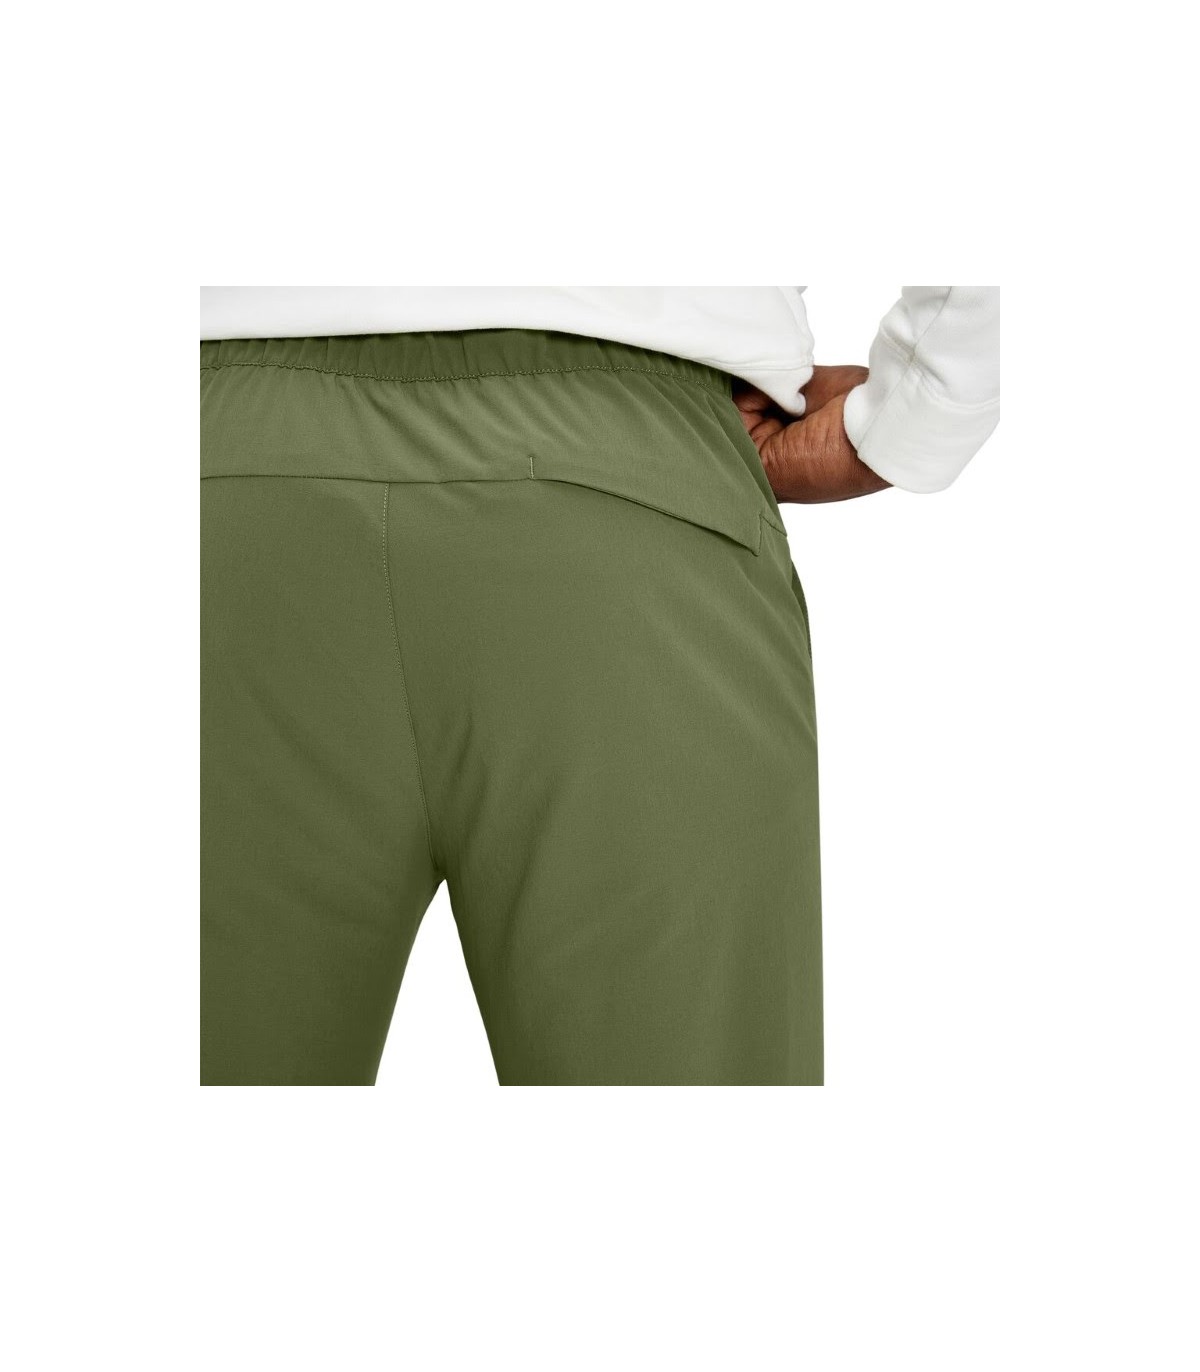 GAIAM Green Active Pants Size XL - 52% off